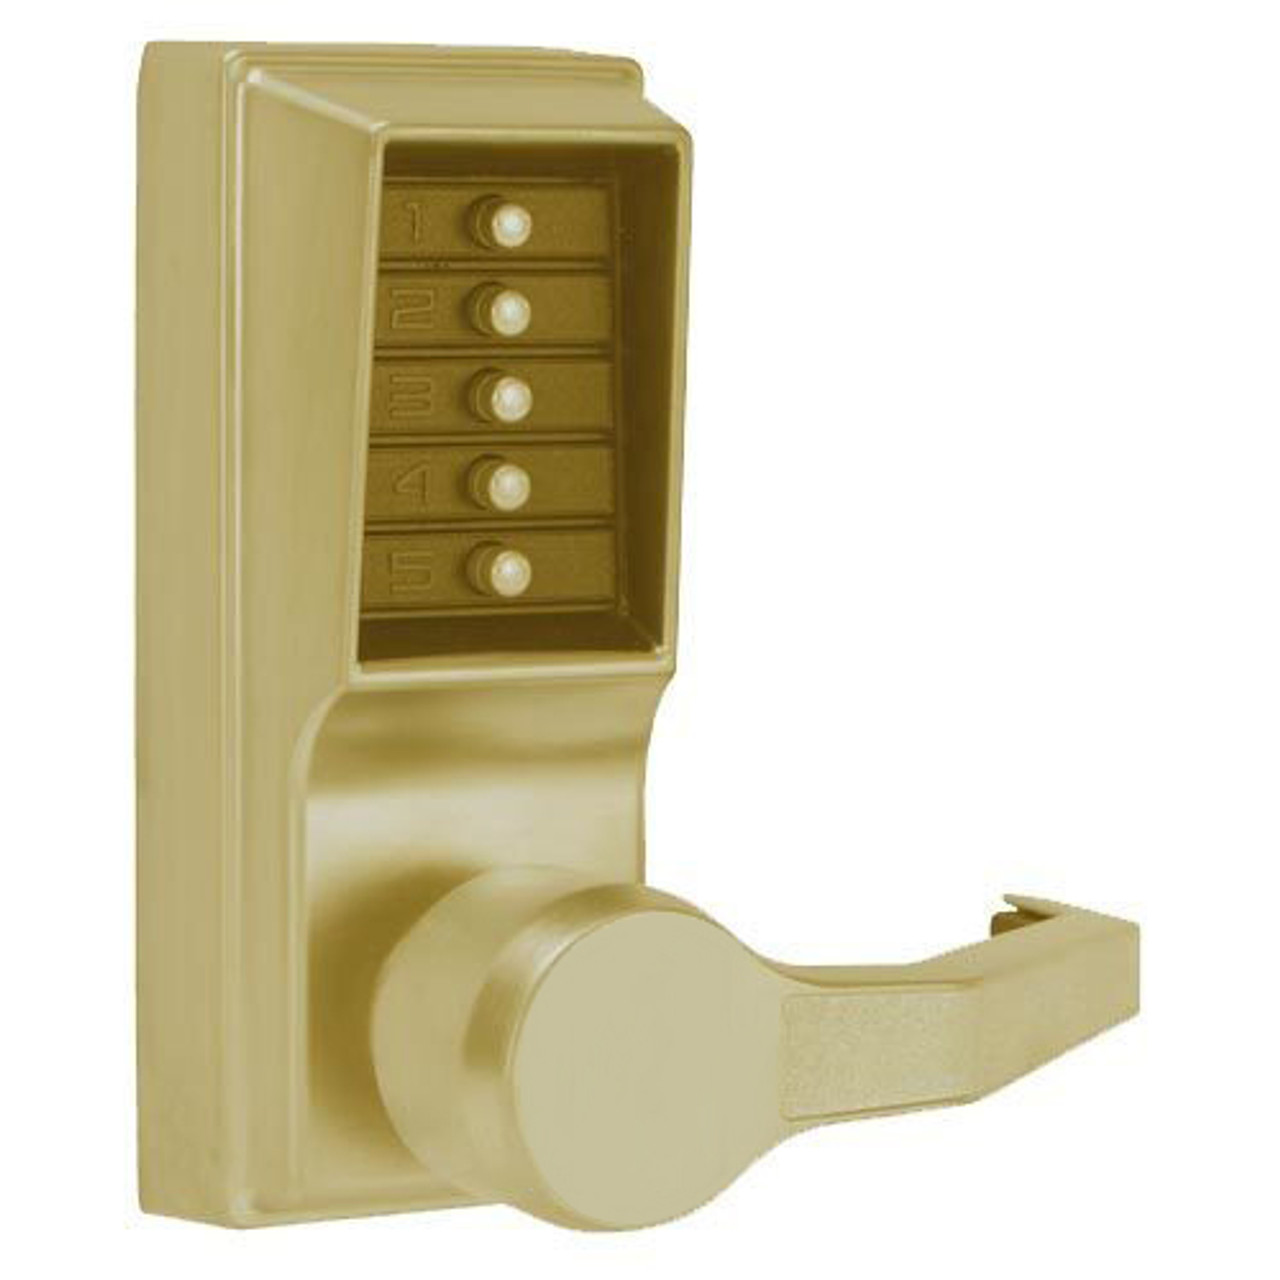 LR1031-05-41 Simplex Pushbutton Lever Lock with No Key Override in Antique Brass